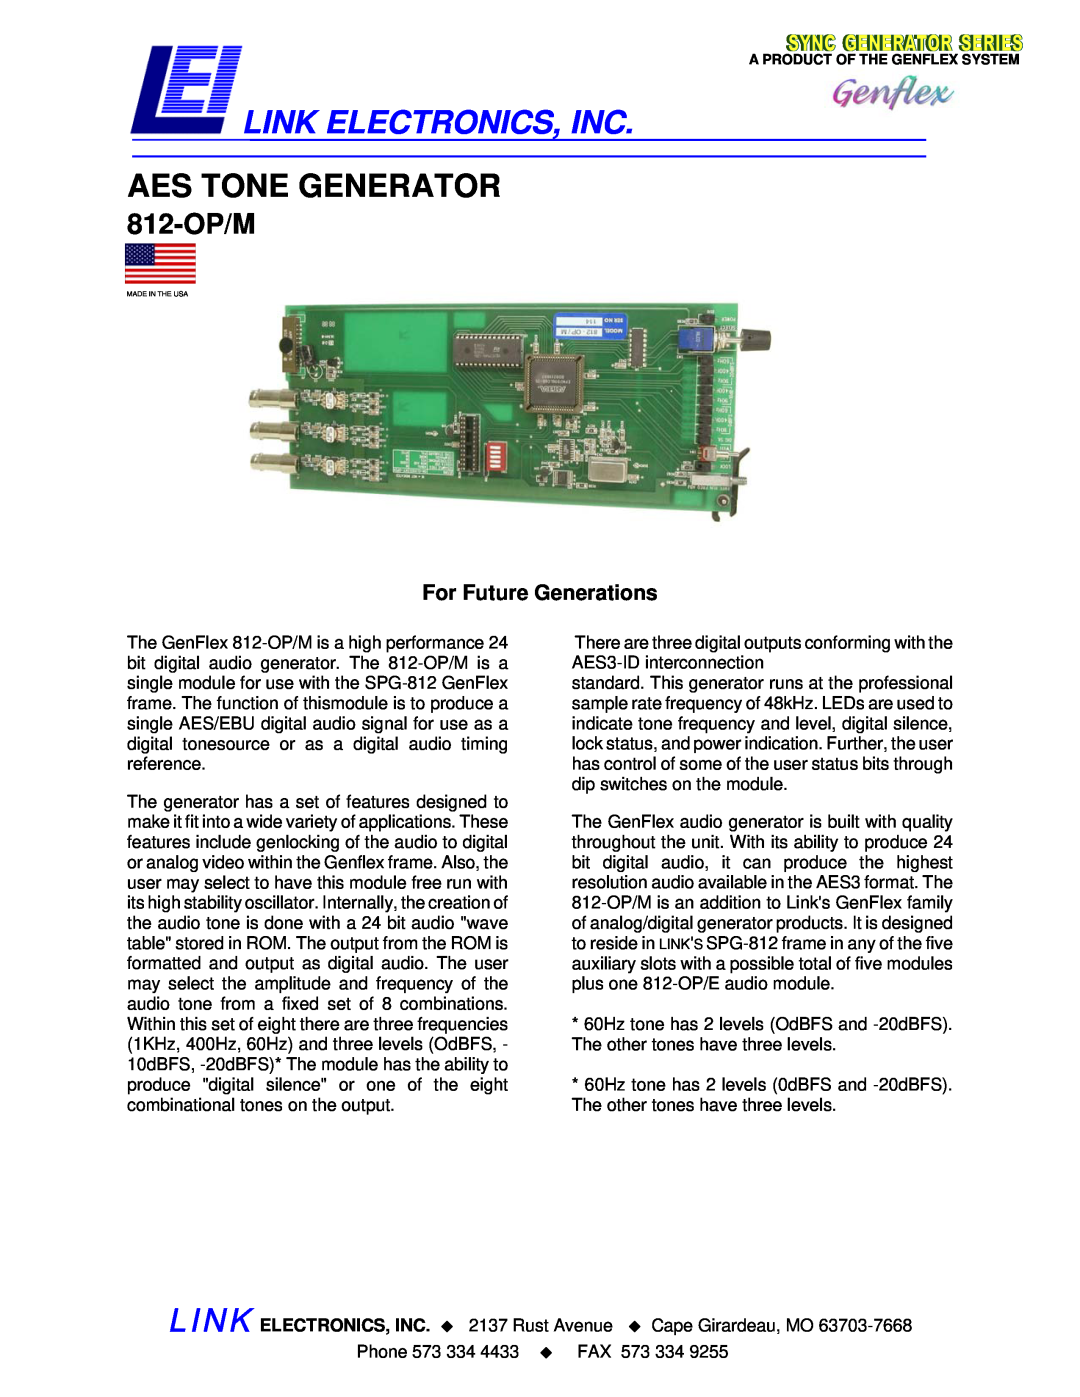 Link electronic 812-OP/M manual For Future Generations, Link Electronics, Inc, Aes Tone Generator 